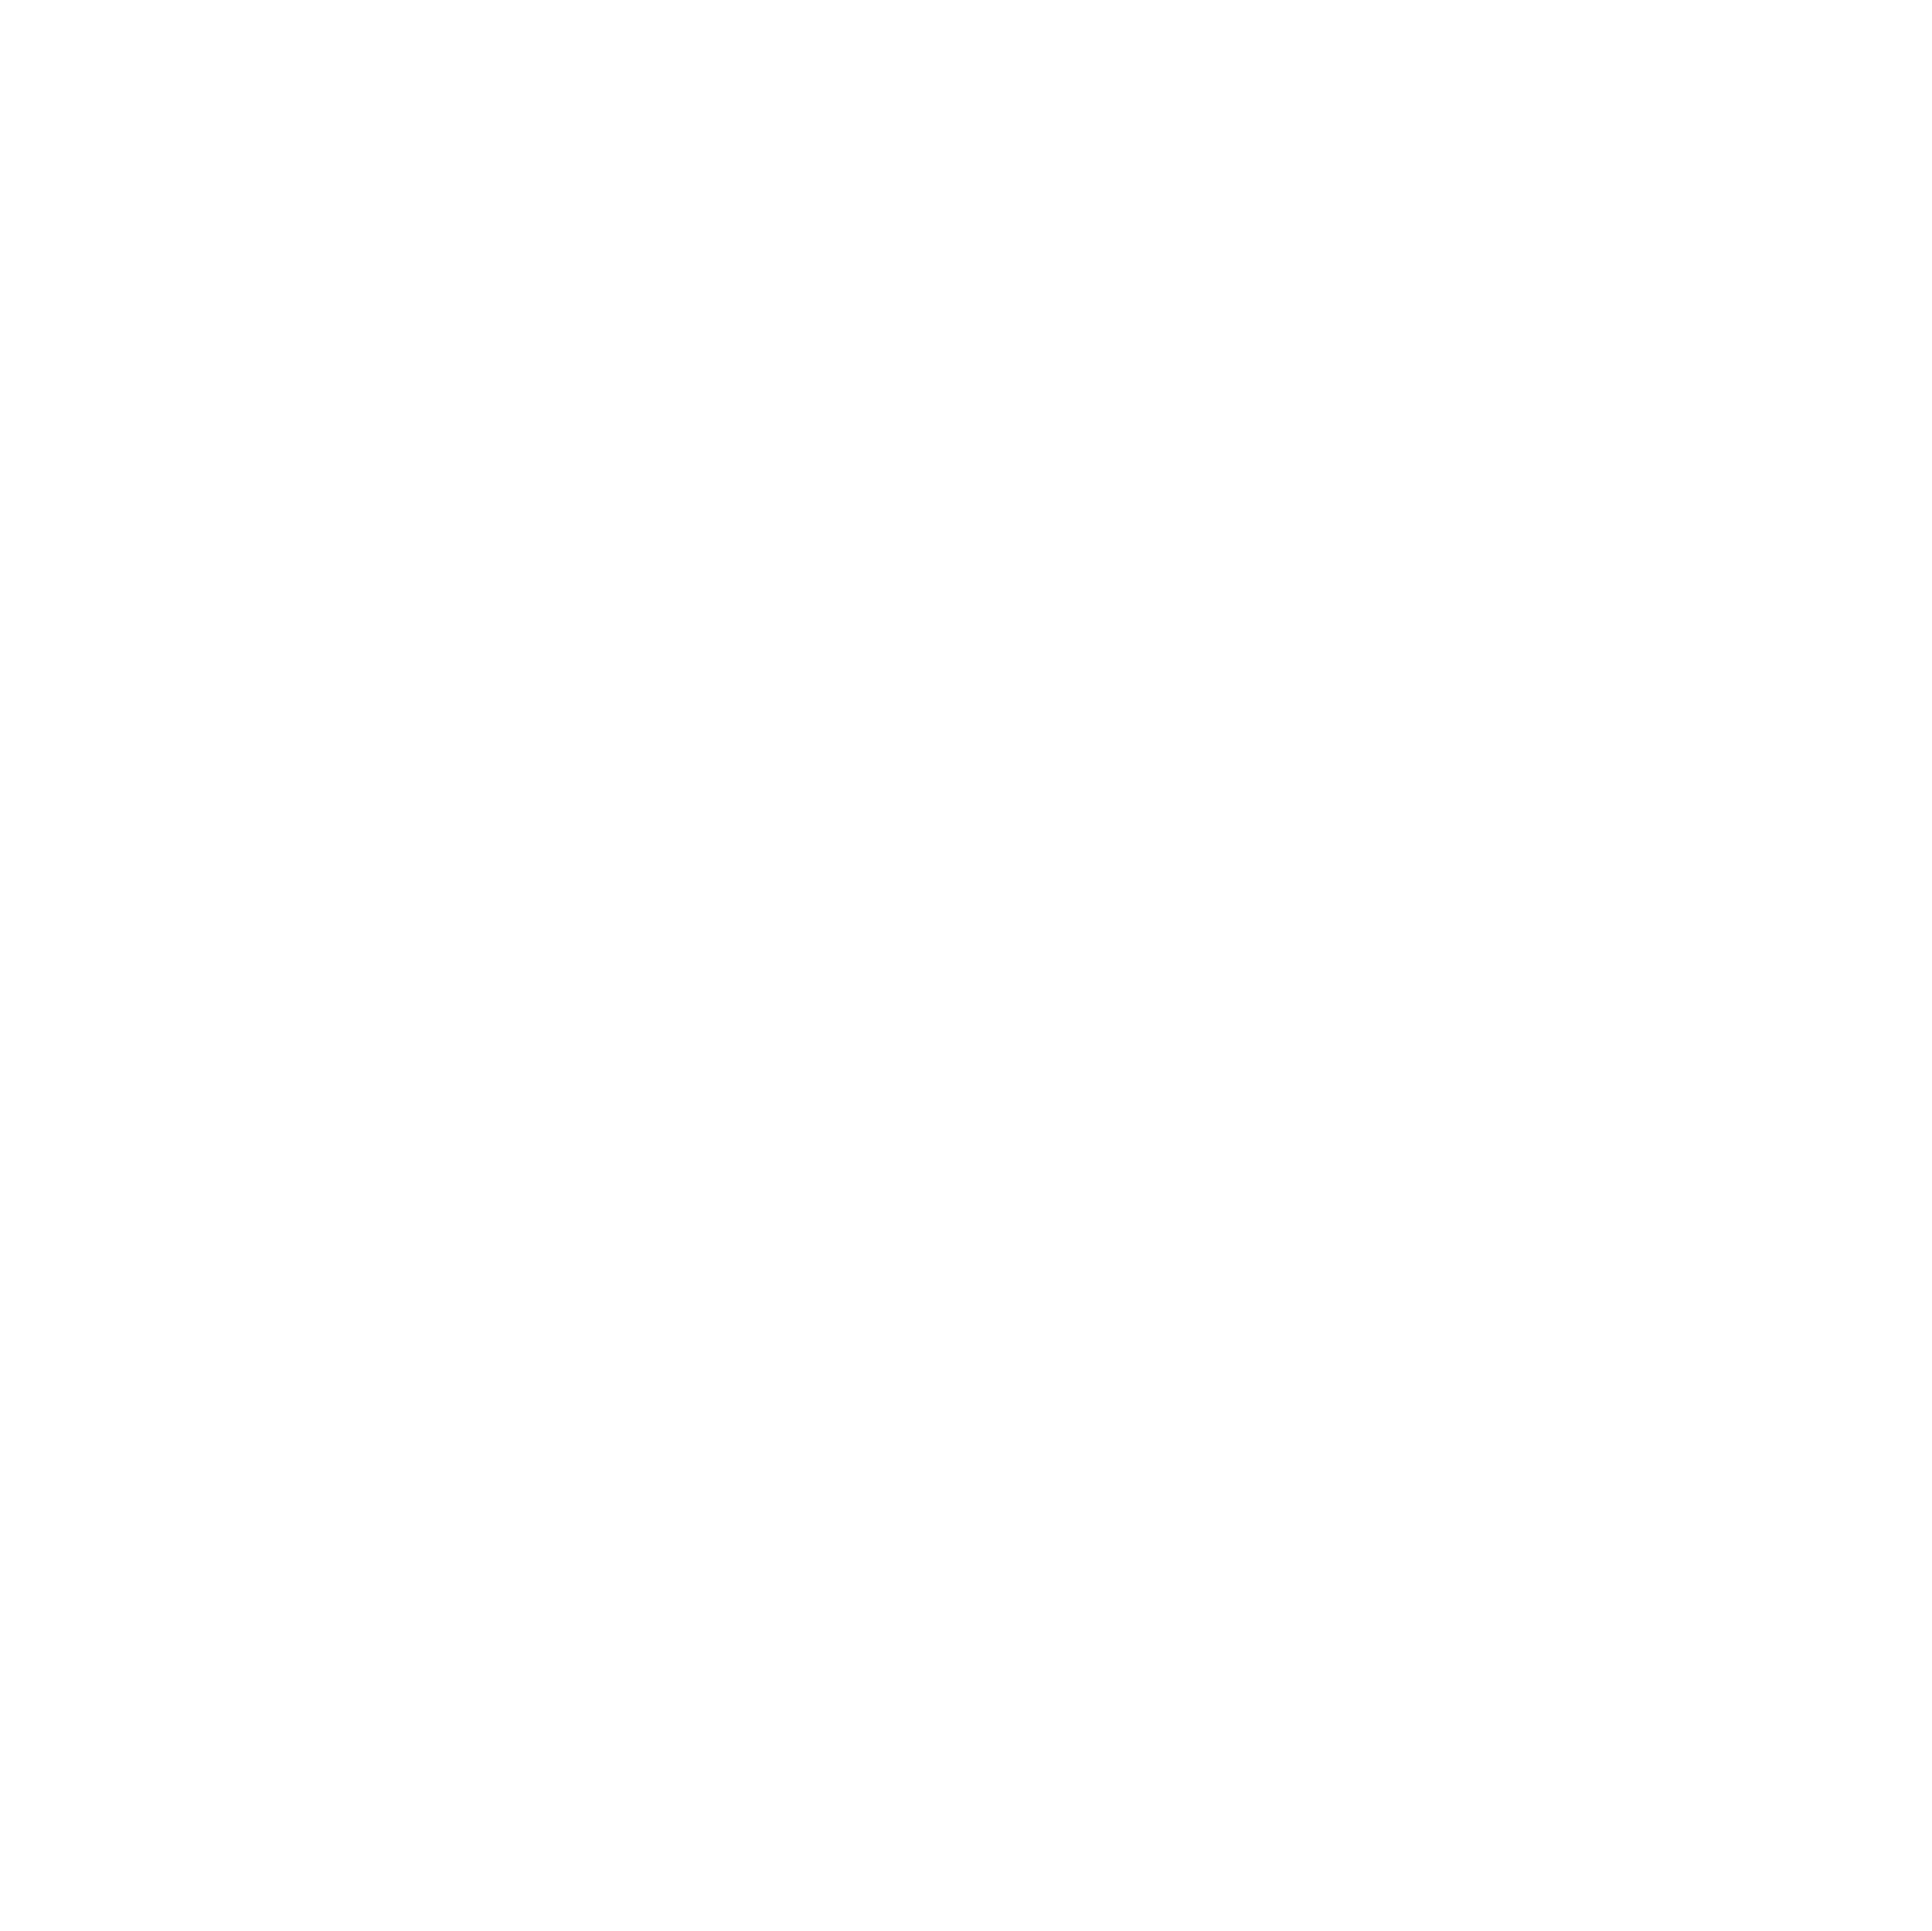 Retune logo in white with transparent background